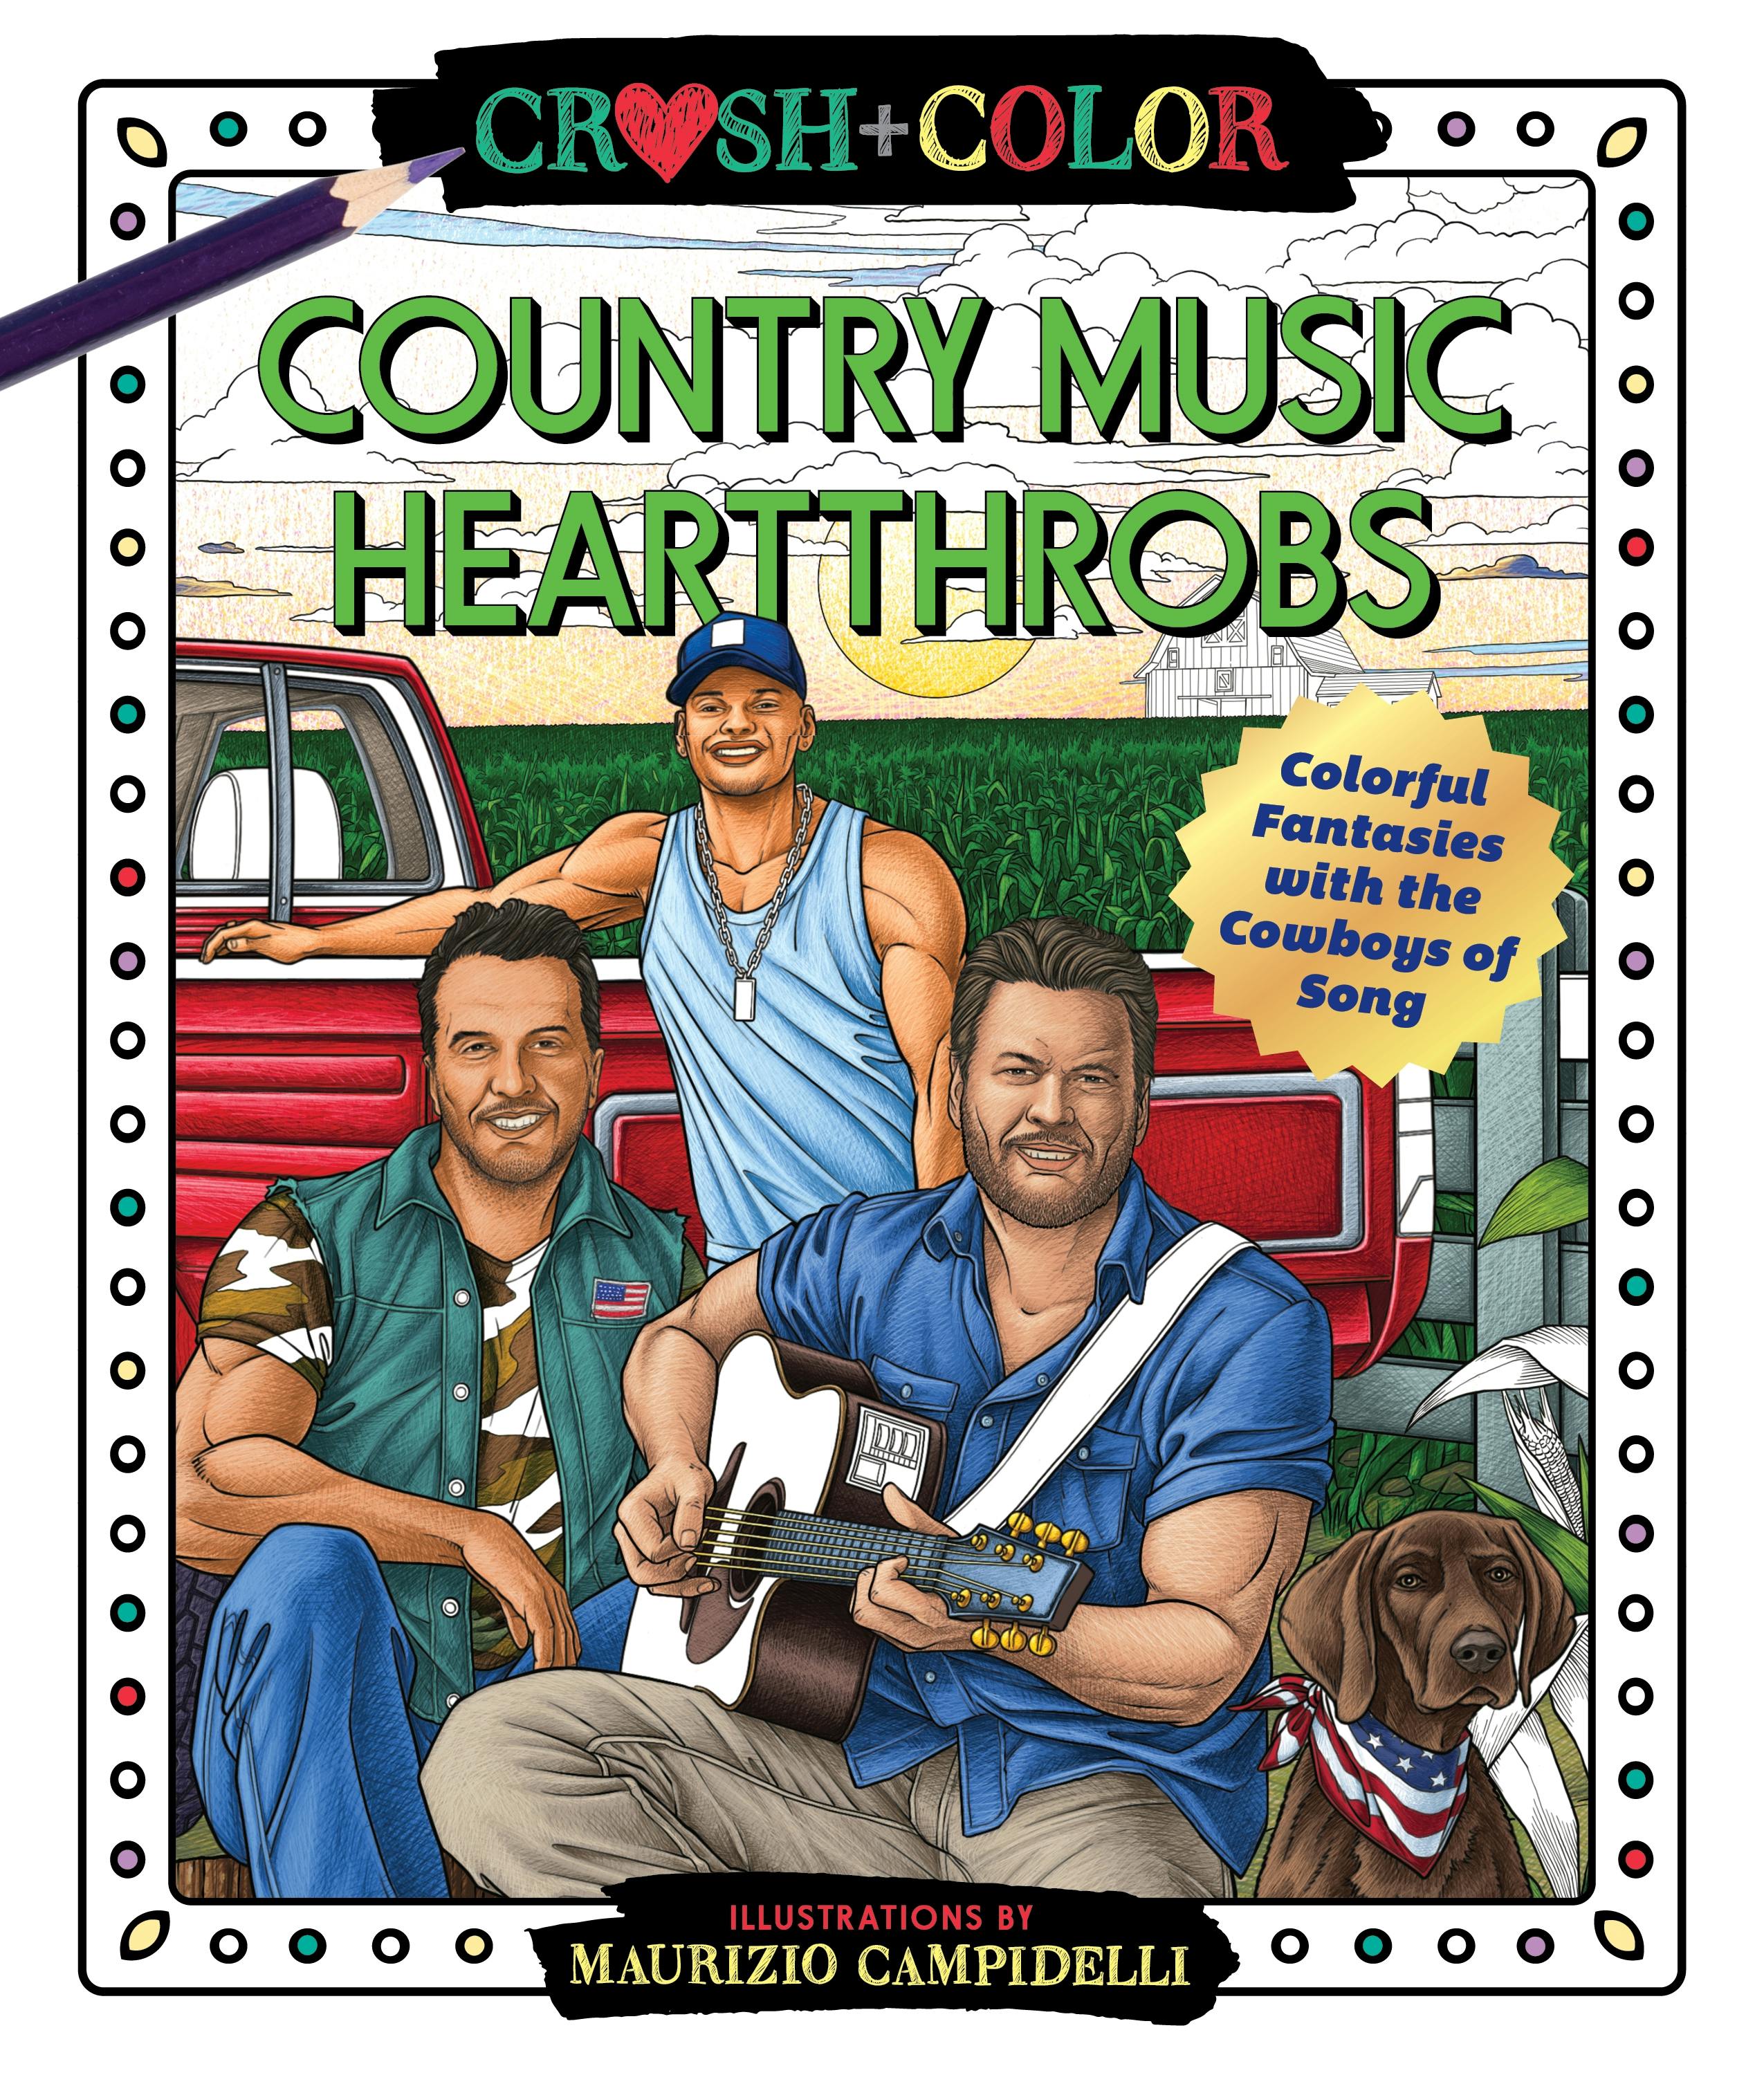 Crush and Color: Country Music Heartthrobs